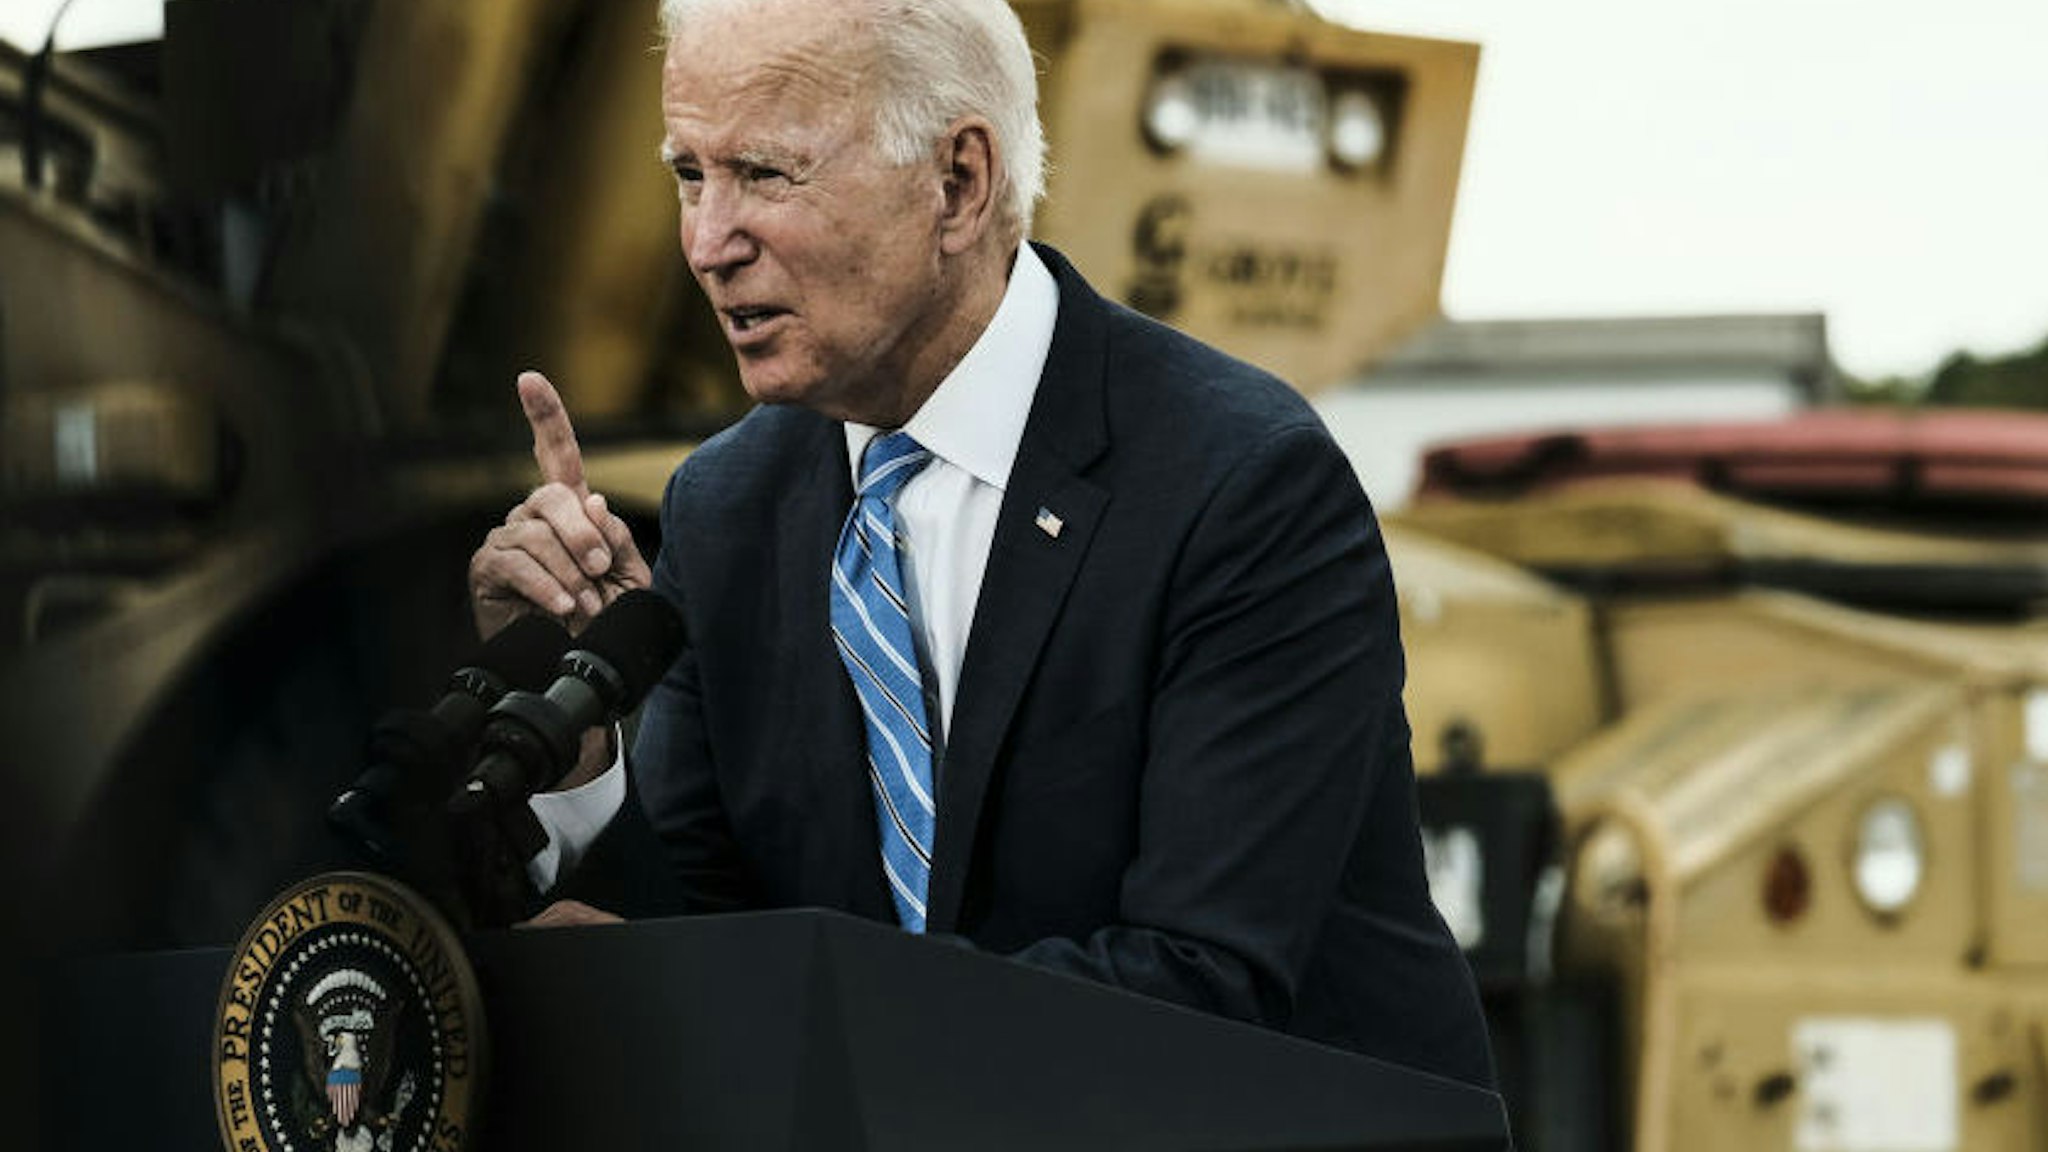 U.S. President Joe Biden speaks during a visit to the International Union of Operating Engineers Local 324 training facility in Howell, Michigan, U.S., on Tuesday, Oct. 5, 2021.